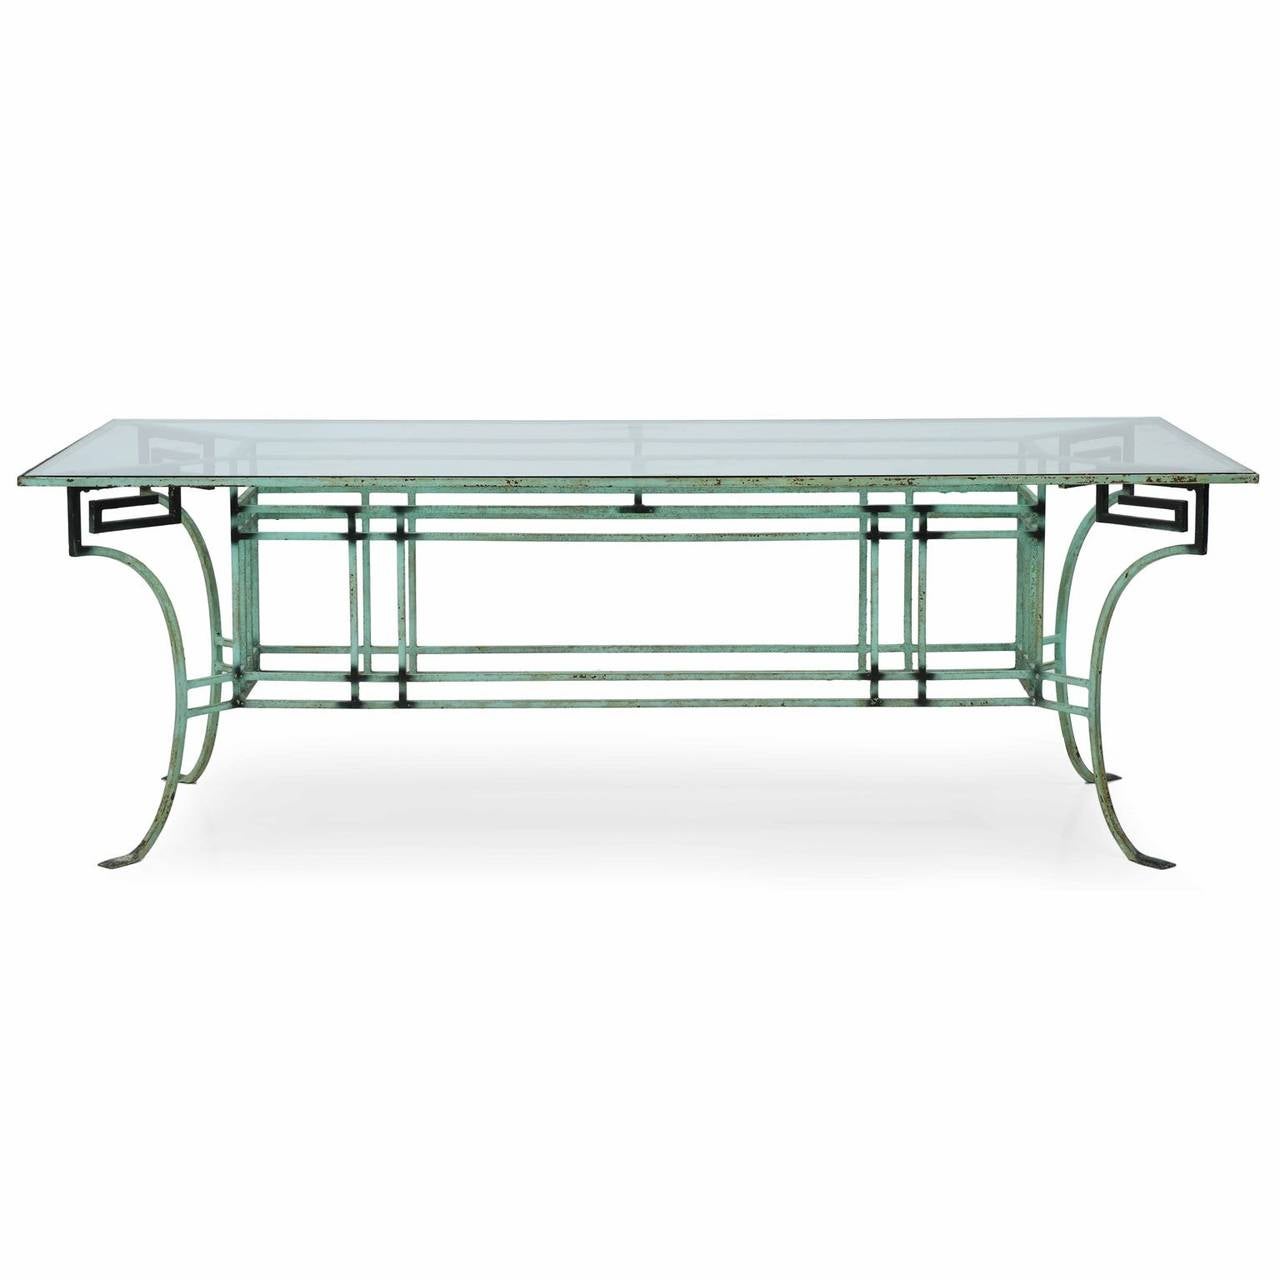 The extremely worn crackled teal paint has simply the most magnetic effect when viewing this table - the table has a certain elegance that juxtaposes the rustic nature of the surface, no doubt from the angular Neoclassical form.  The austere and